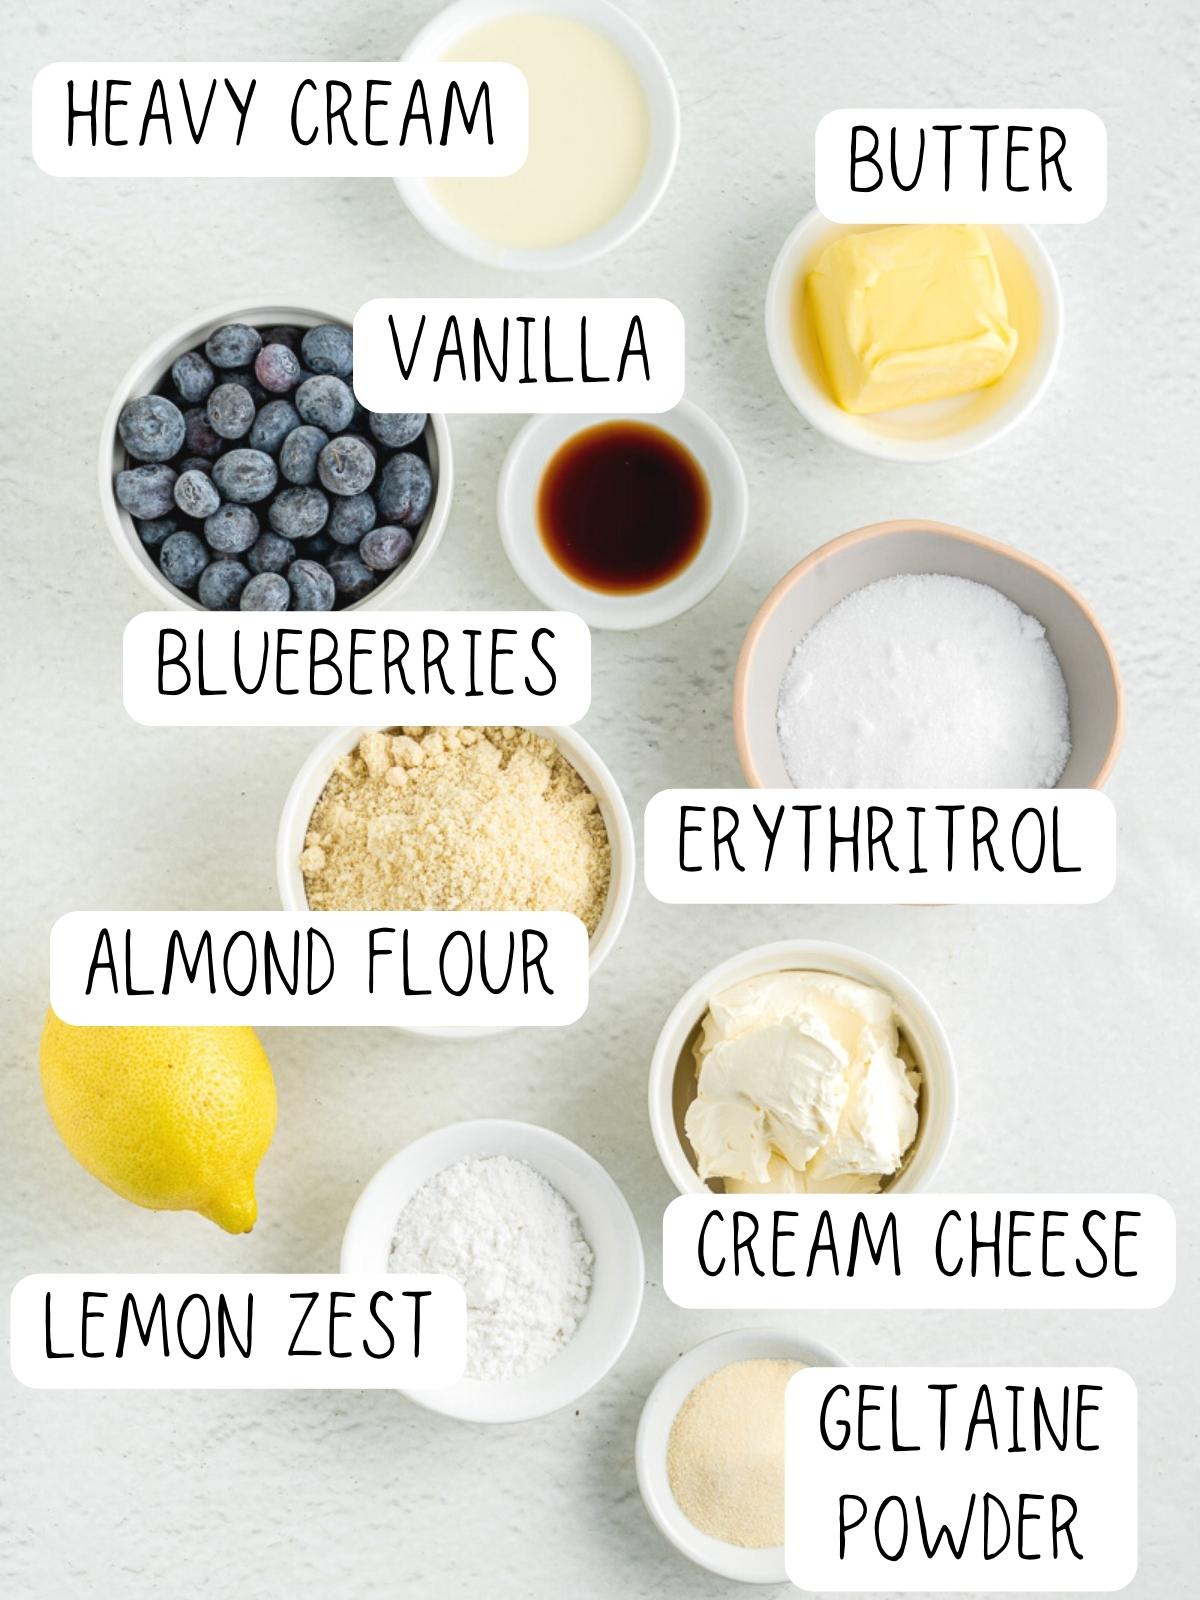 ingredients for no bake blueberry cheesecake, including blueberries, butter, vanilla, heavy cream, almond flour, and erythritrol